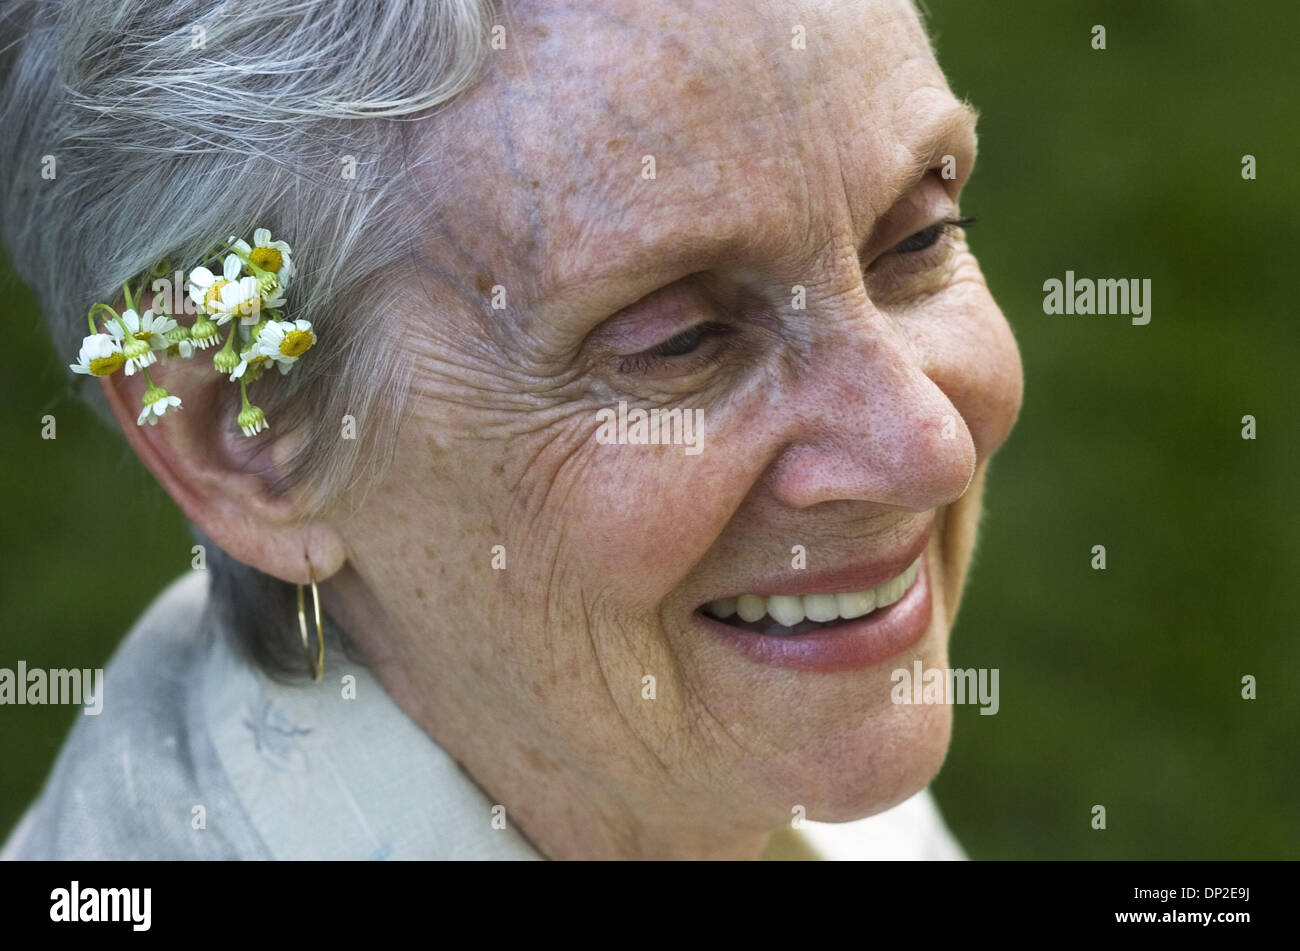 May 31, 2006; Sacramento, CA, USA; Betty Jensen of Auburn shows a bit of nature in her fashion by adoring her ear with a feverfew flower during an open house for the new location for the Sierra Nevada Conservancy in Auburn May 31, 2006.  Her husband, Everett, made a special oil painted portrait for the event.   Mandatory Credit: Photo by Autumn Cruz/Sacramento Bee/ZUMA Press. (©) C Stock Photo